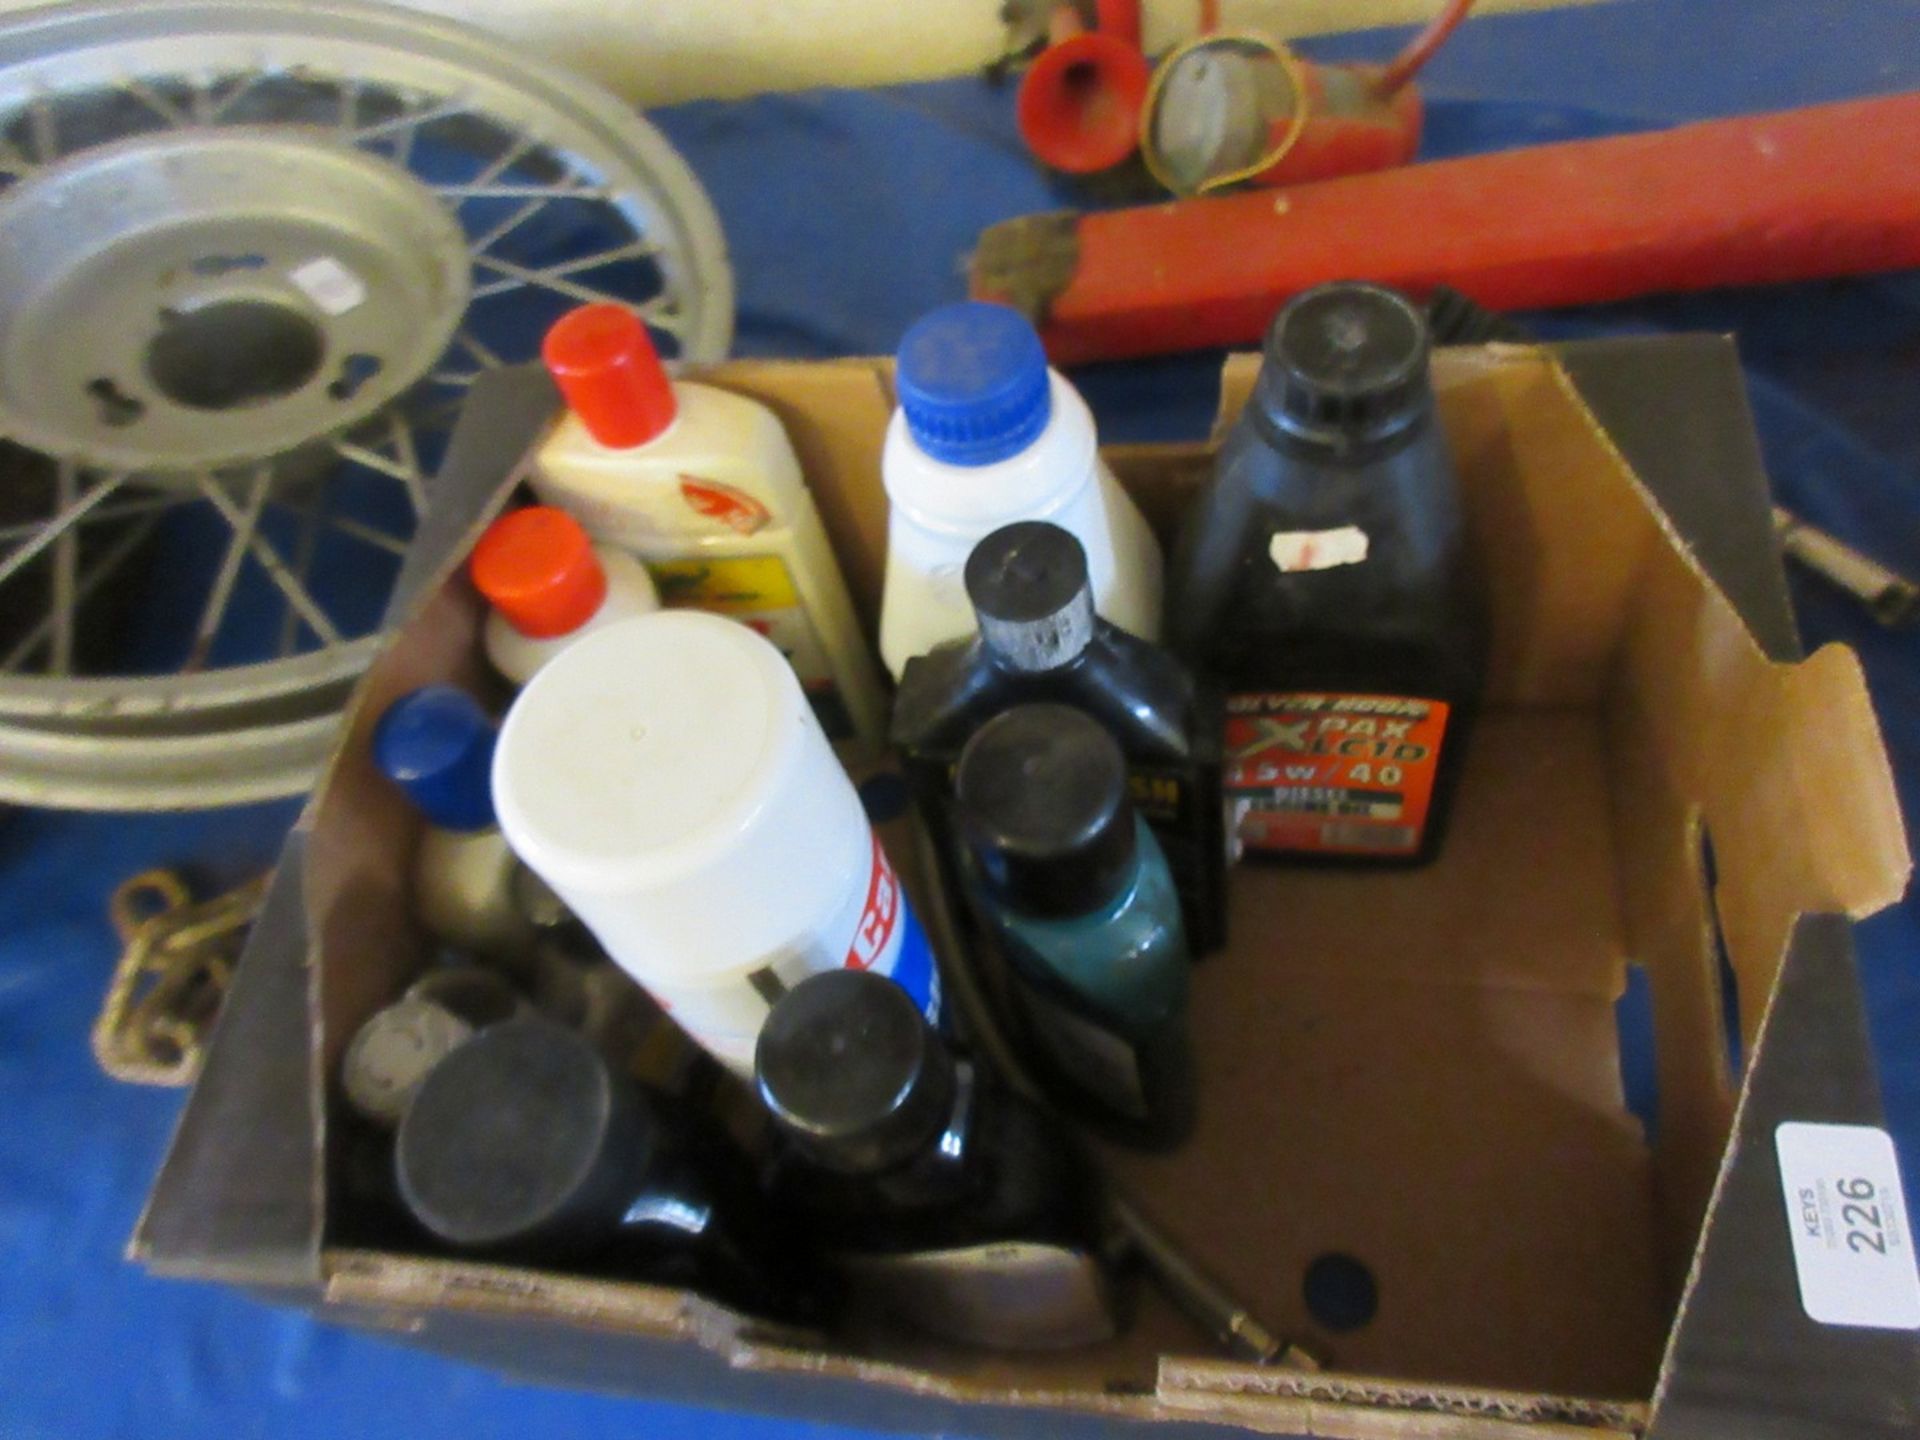 Box containing various valeting products